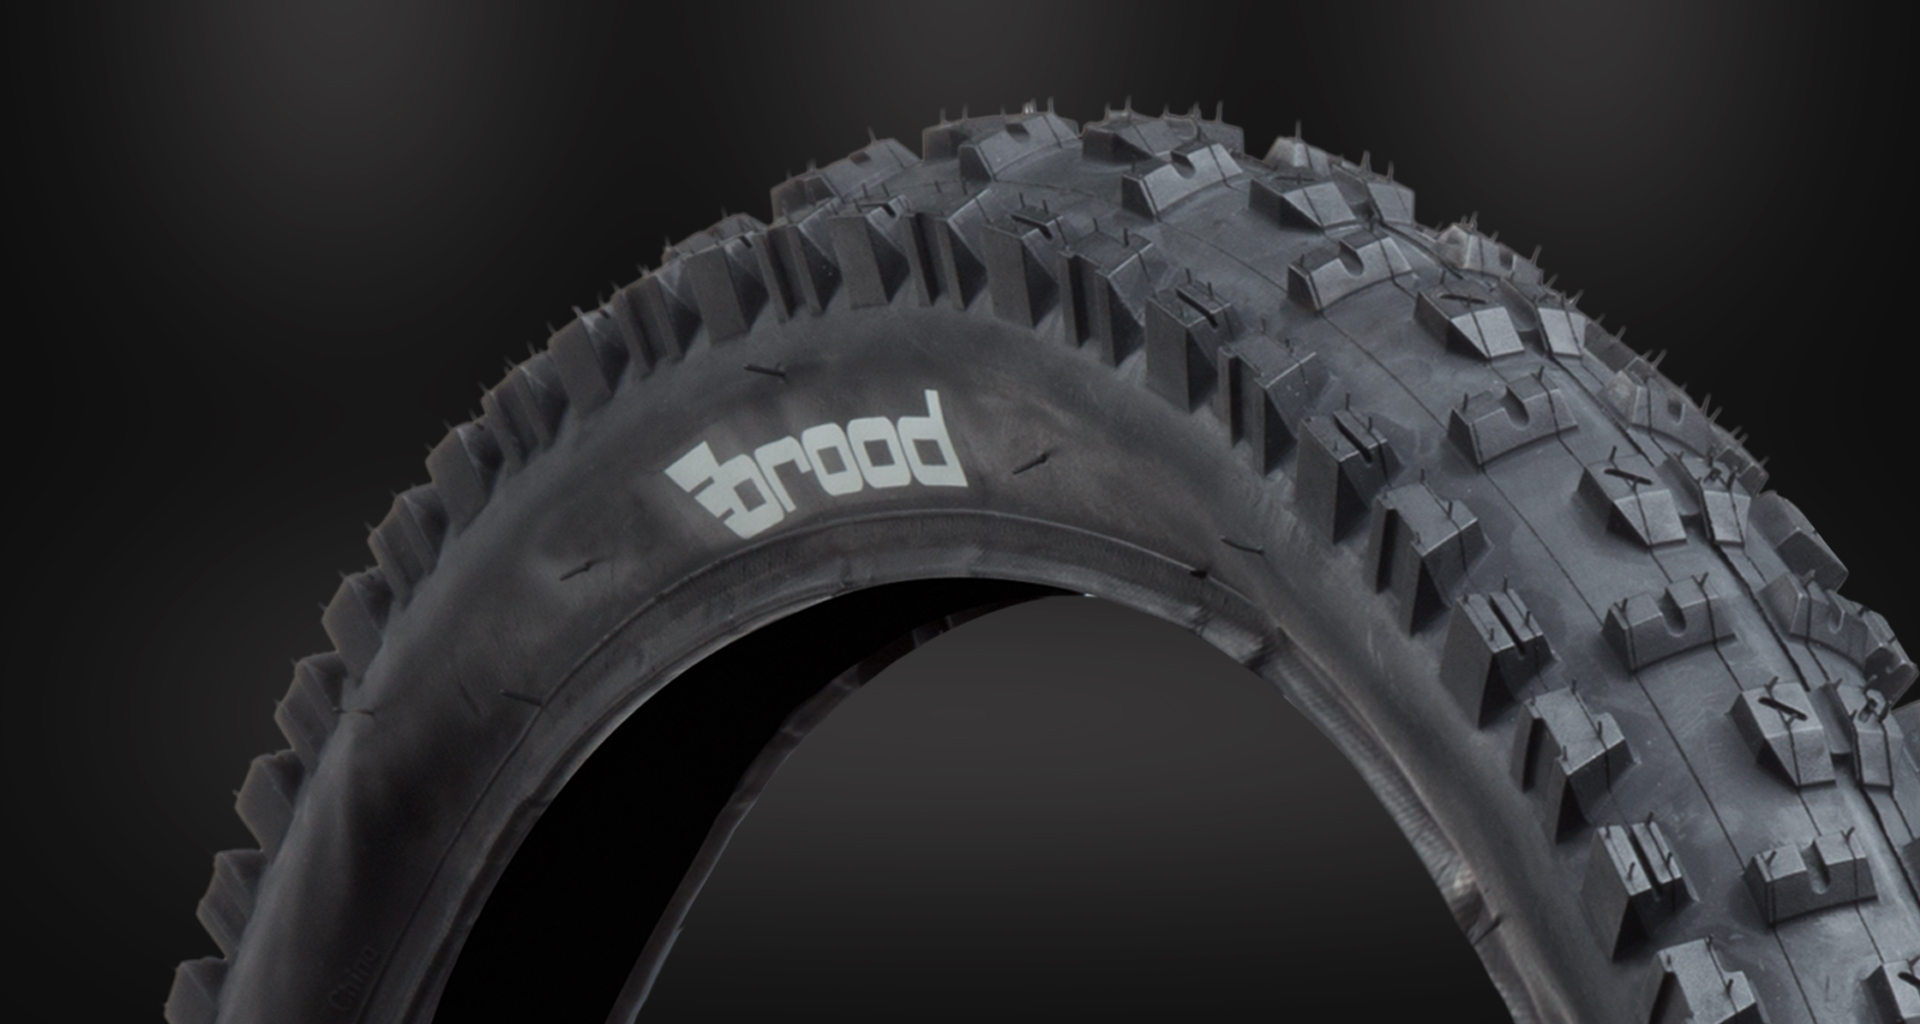 Brood Maxtion 20" x 2.20" Tubeless Ready Tire